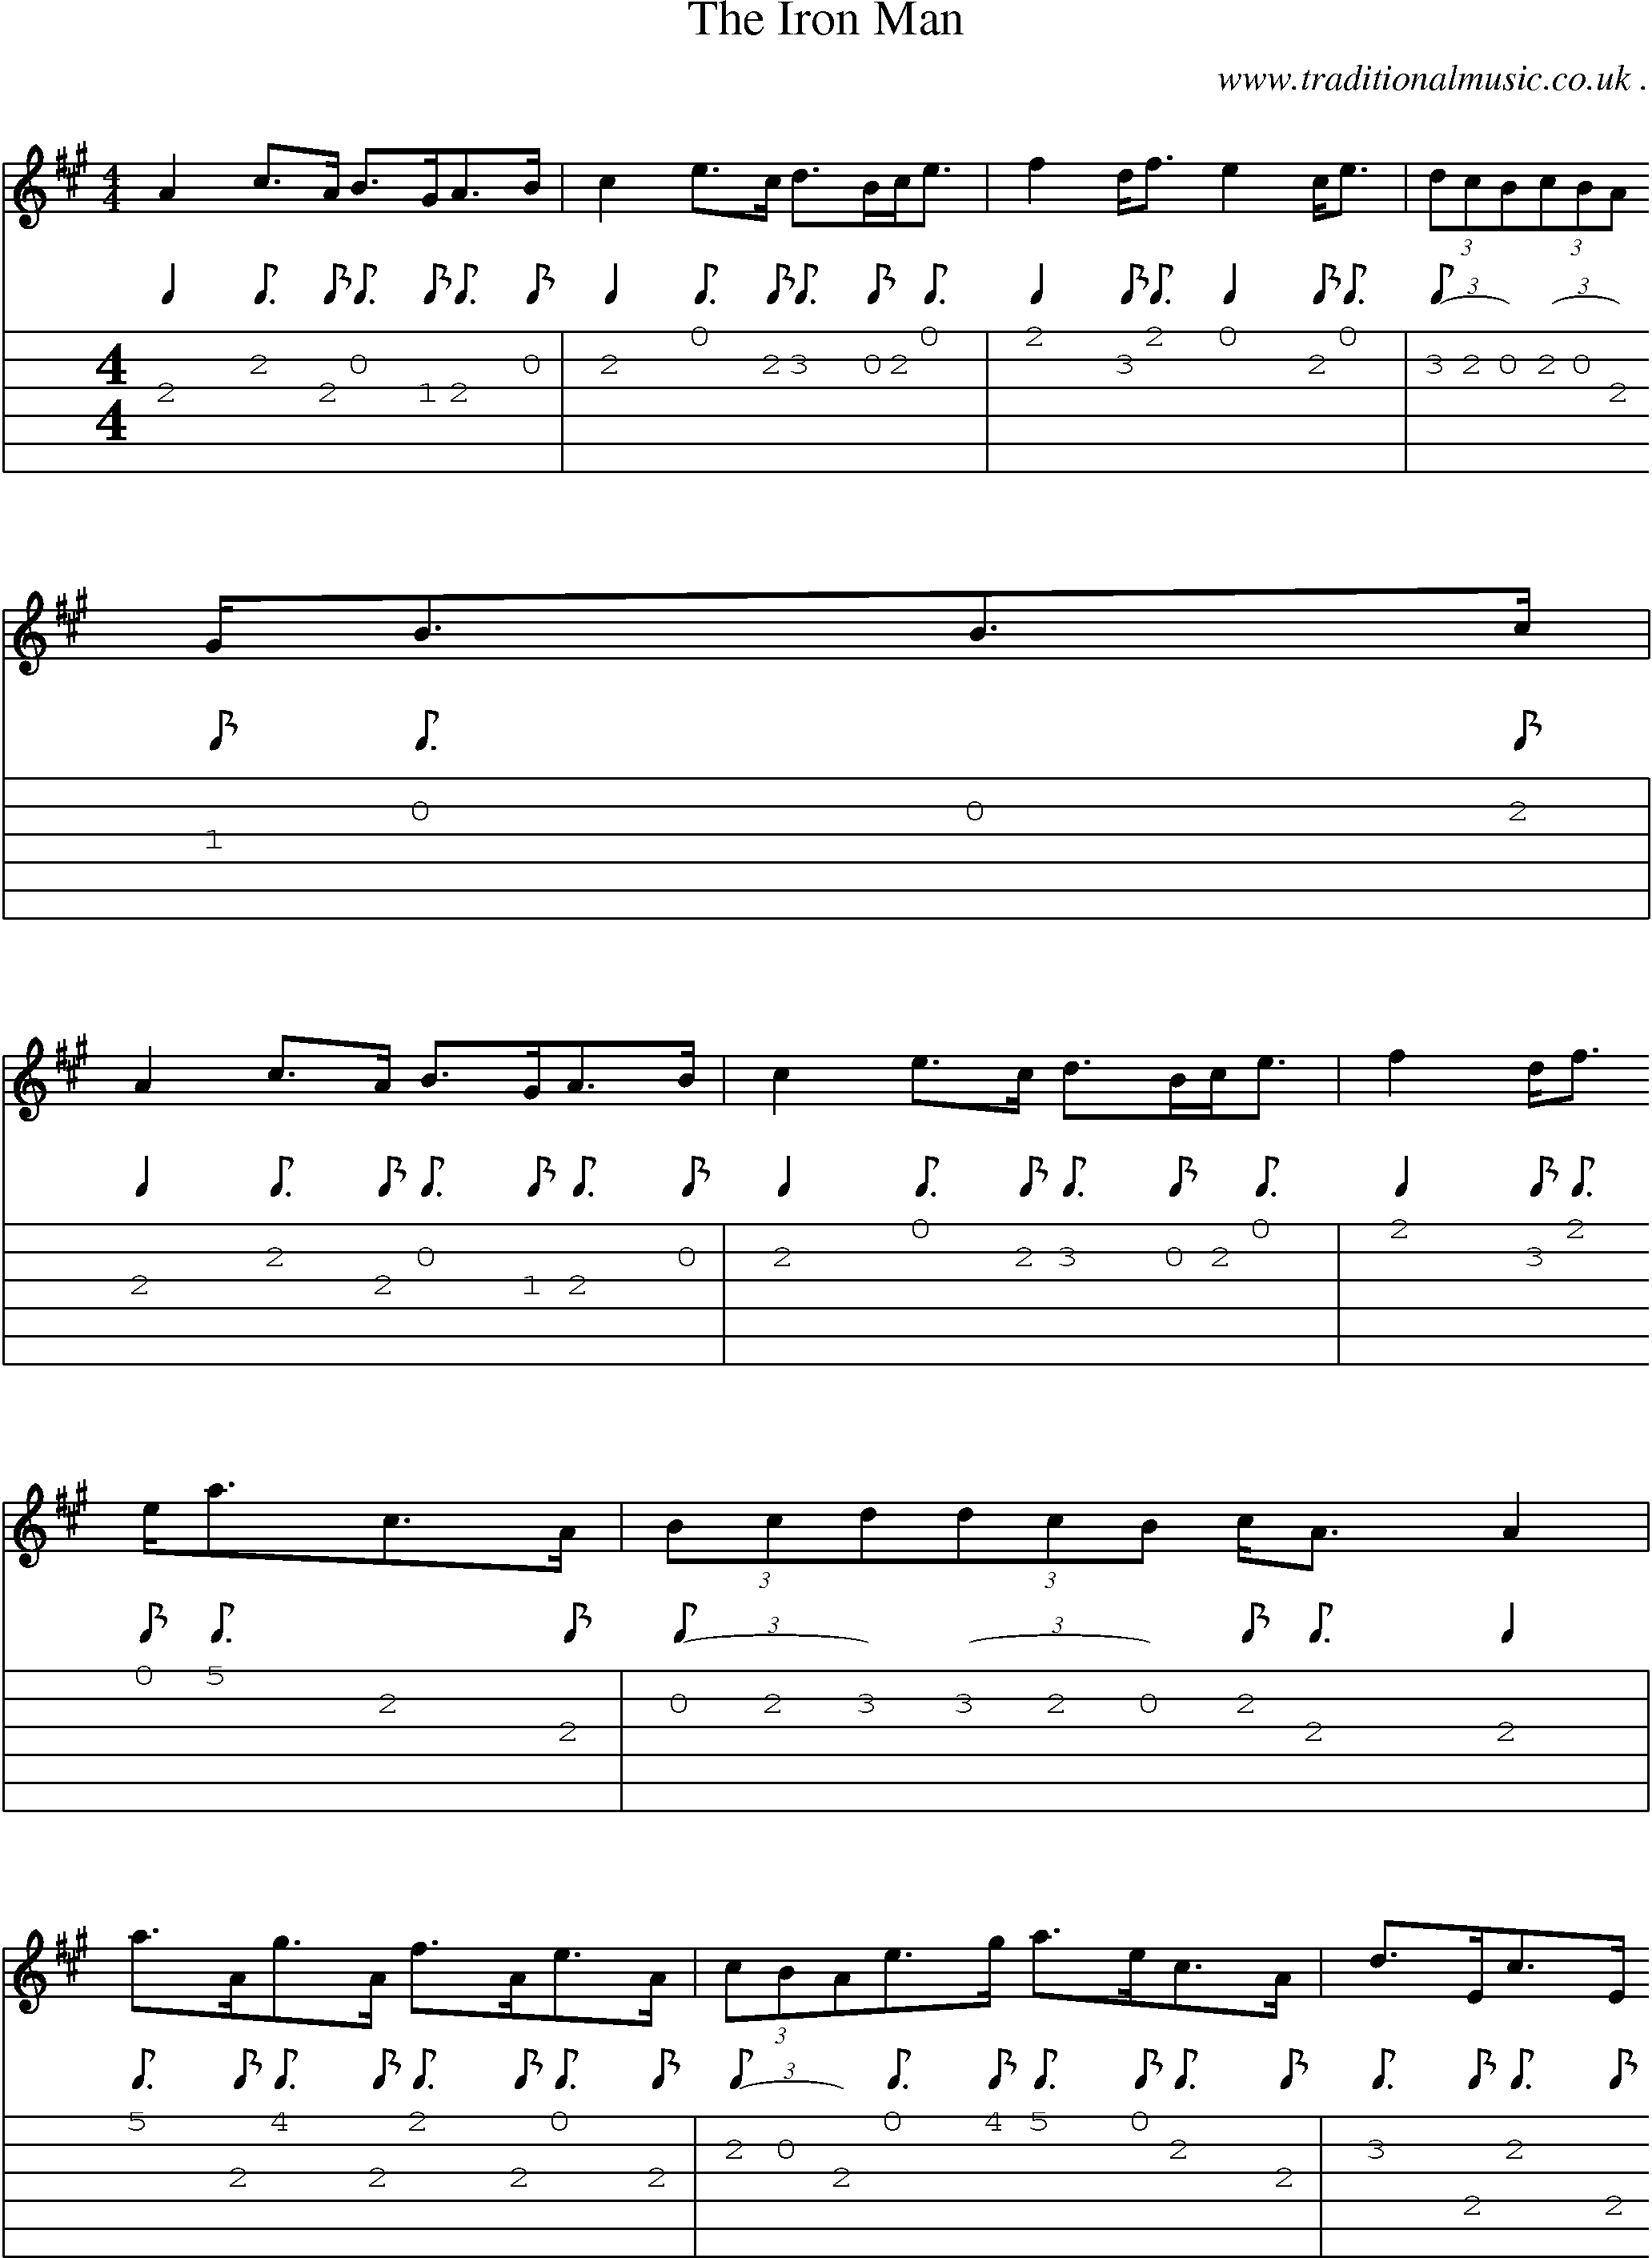 Sheet-Music and Guitar Tabs for The Iron Man